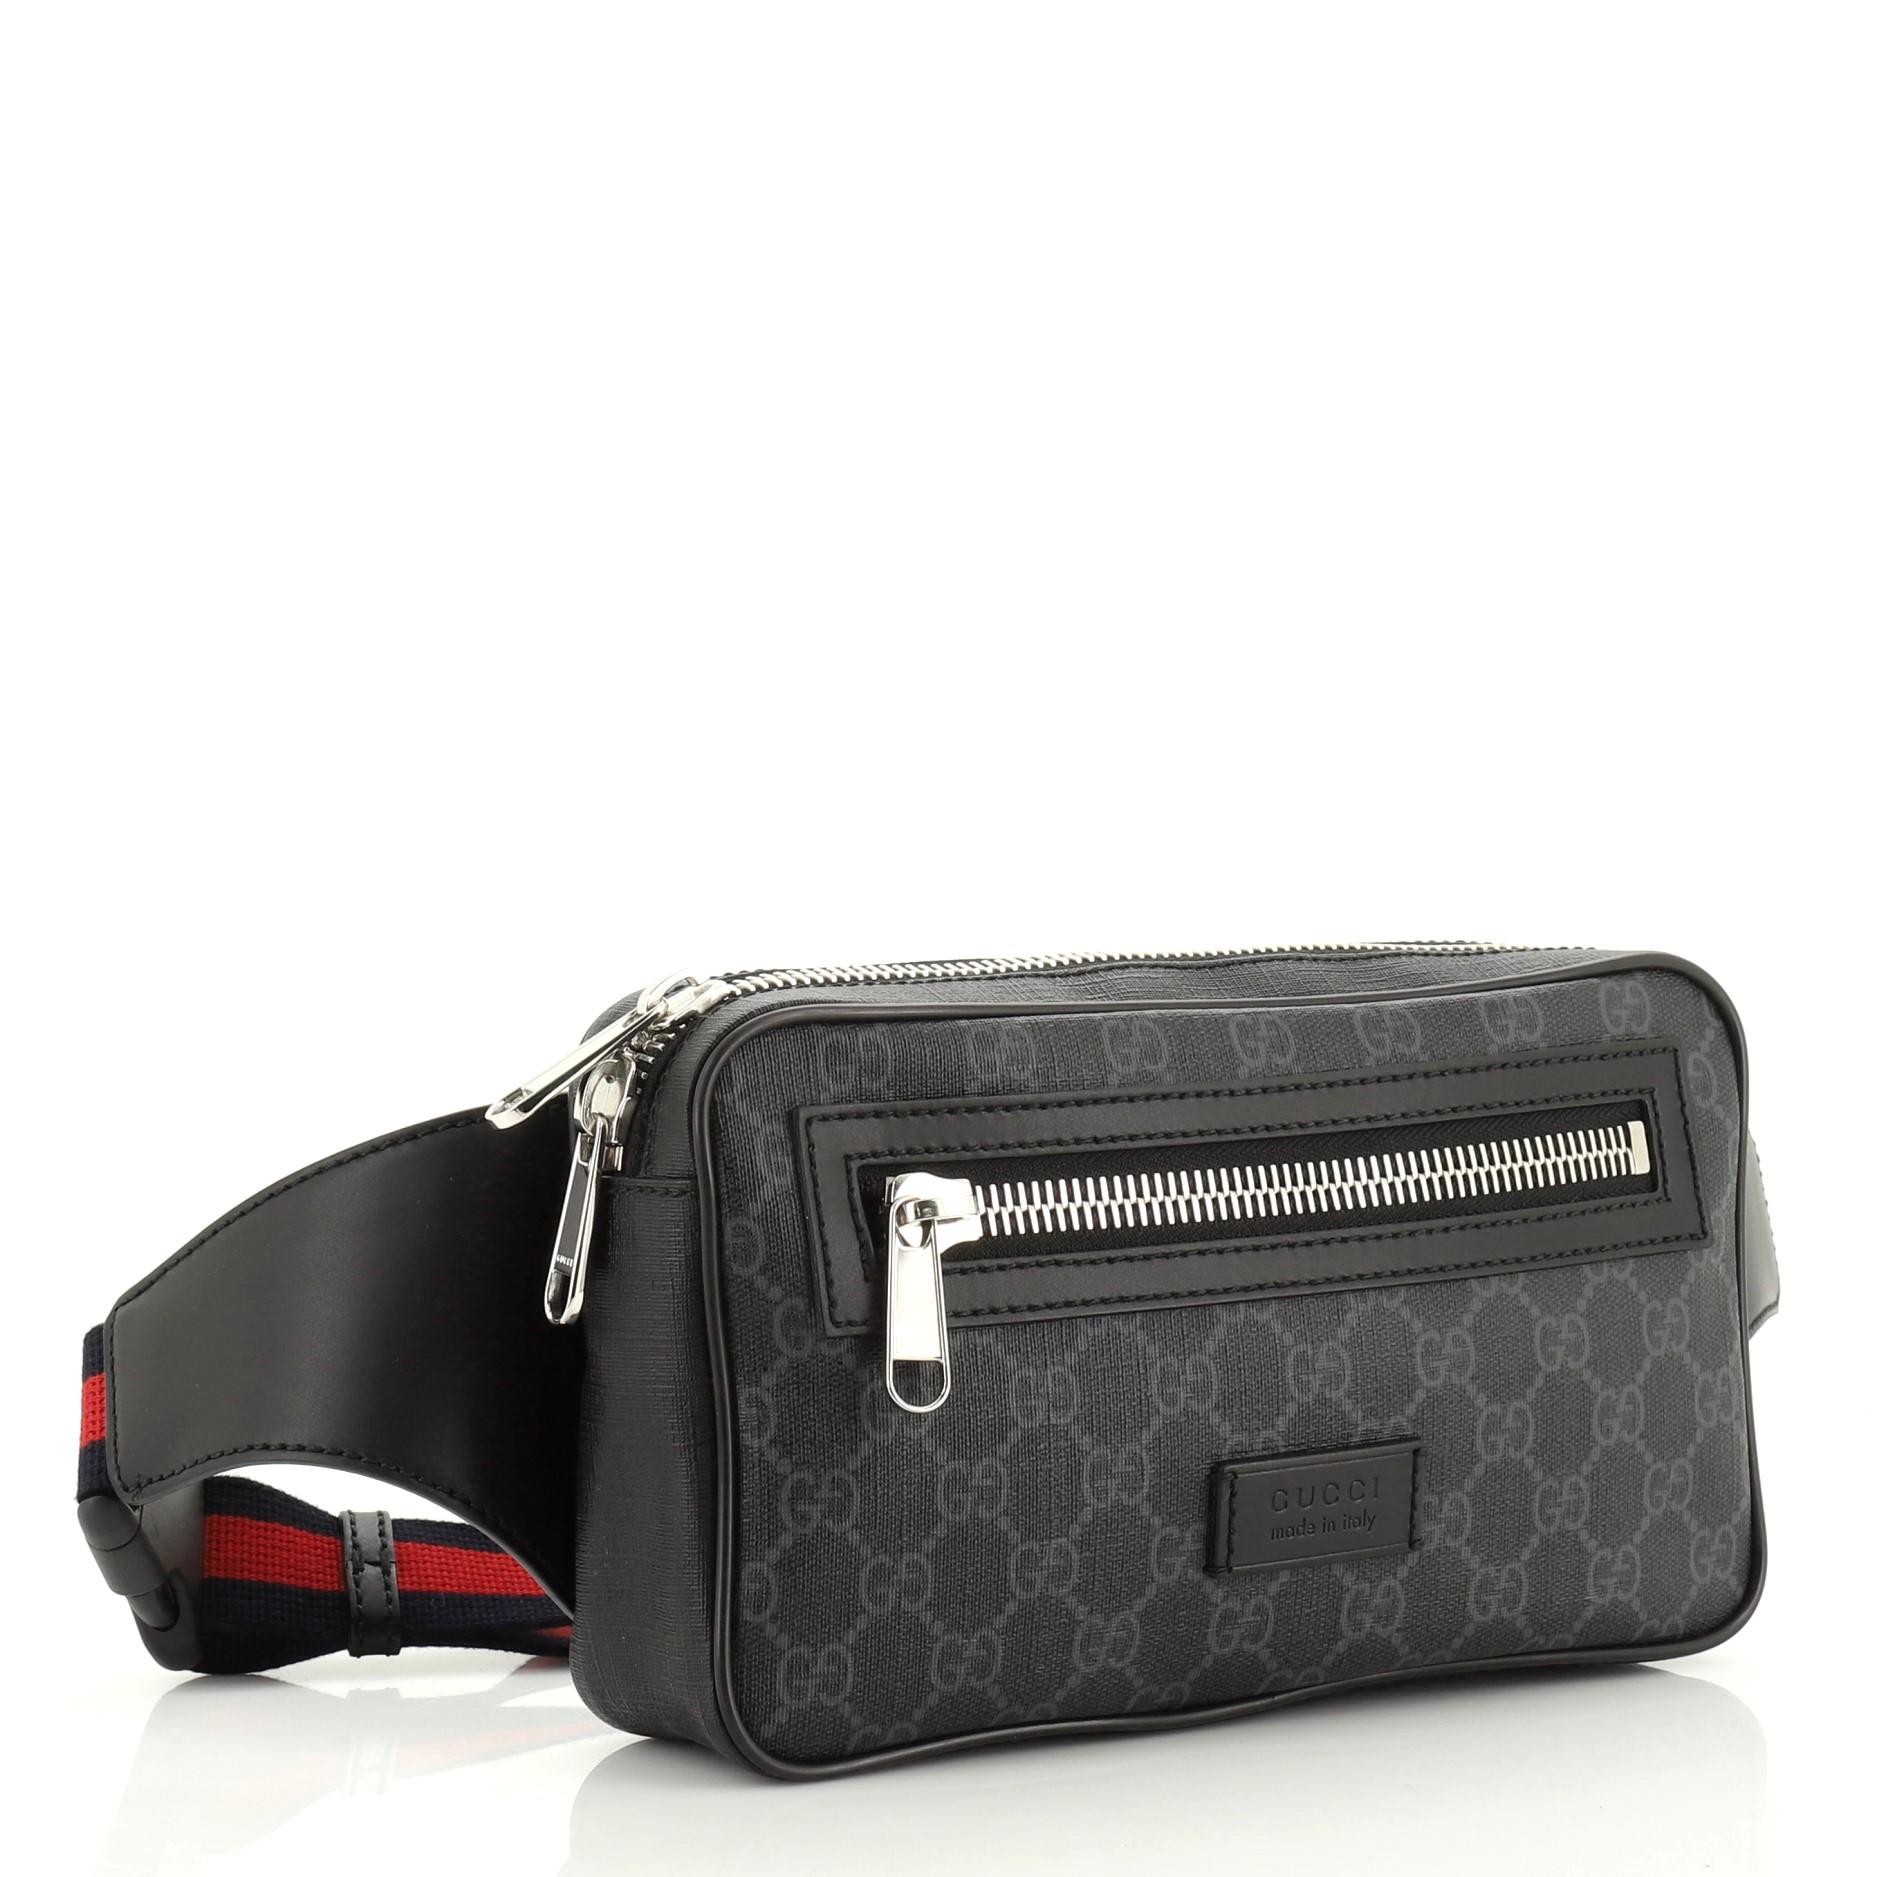 This Gucci Soft Zip Belt Bag GG Coated Canvas Small, crafted from black GG coated canvas, features signature web strap, exterior front zip pocket and silver-tone hardware. Its zip closure opens to a black fabric interior. 

Condition: Great. Minor